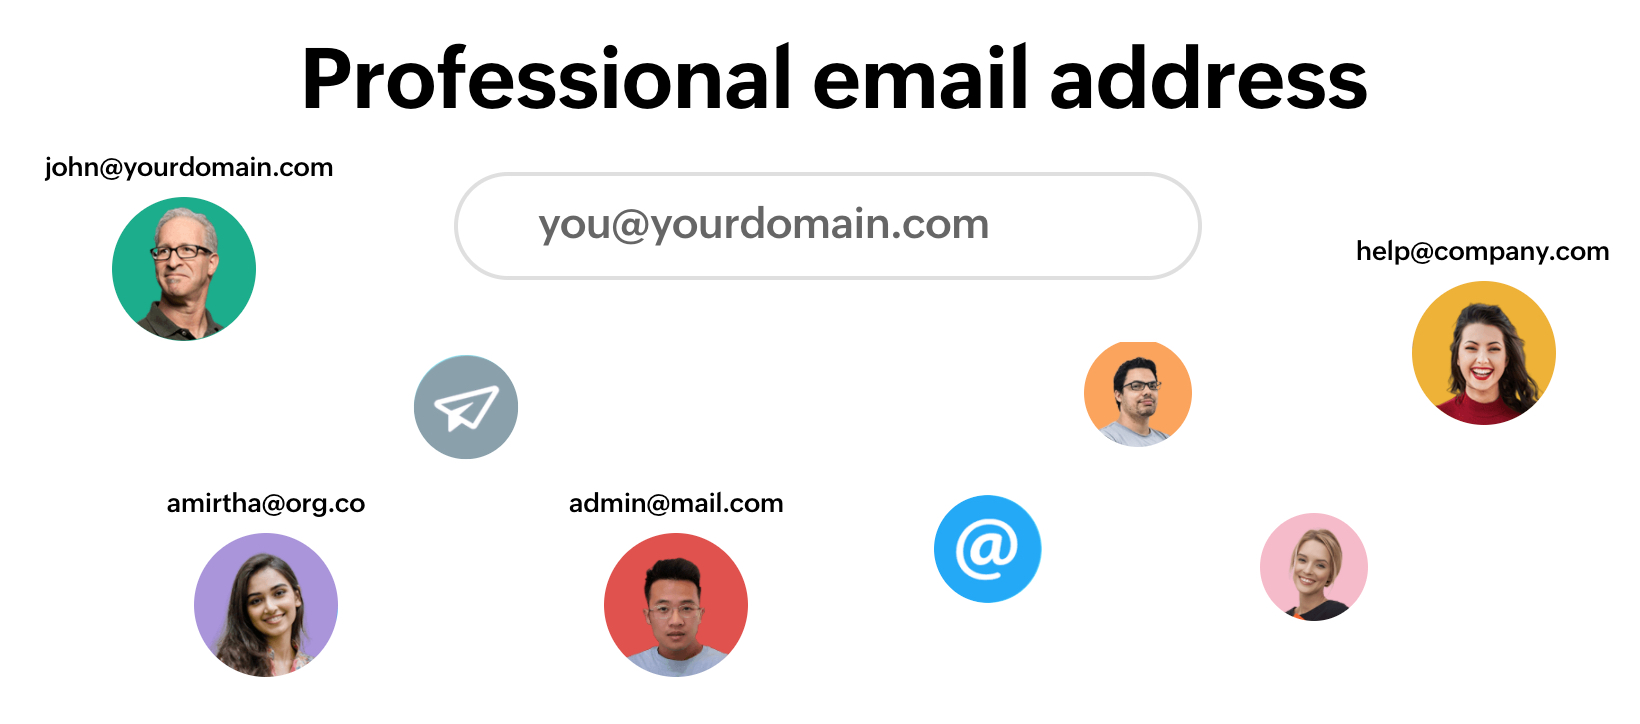 What email address looks professional?